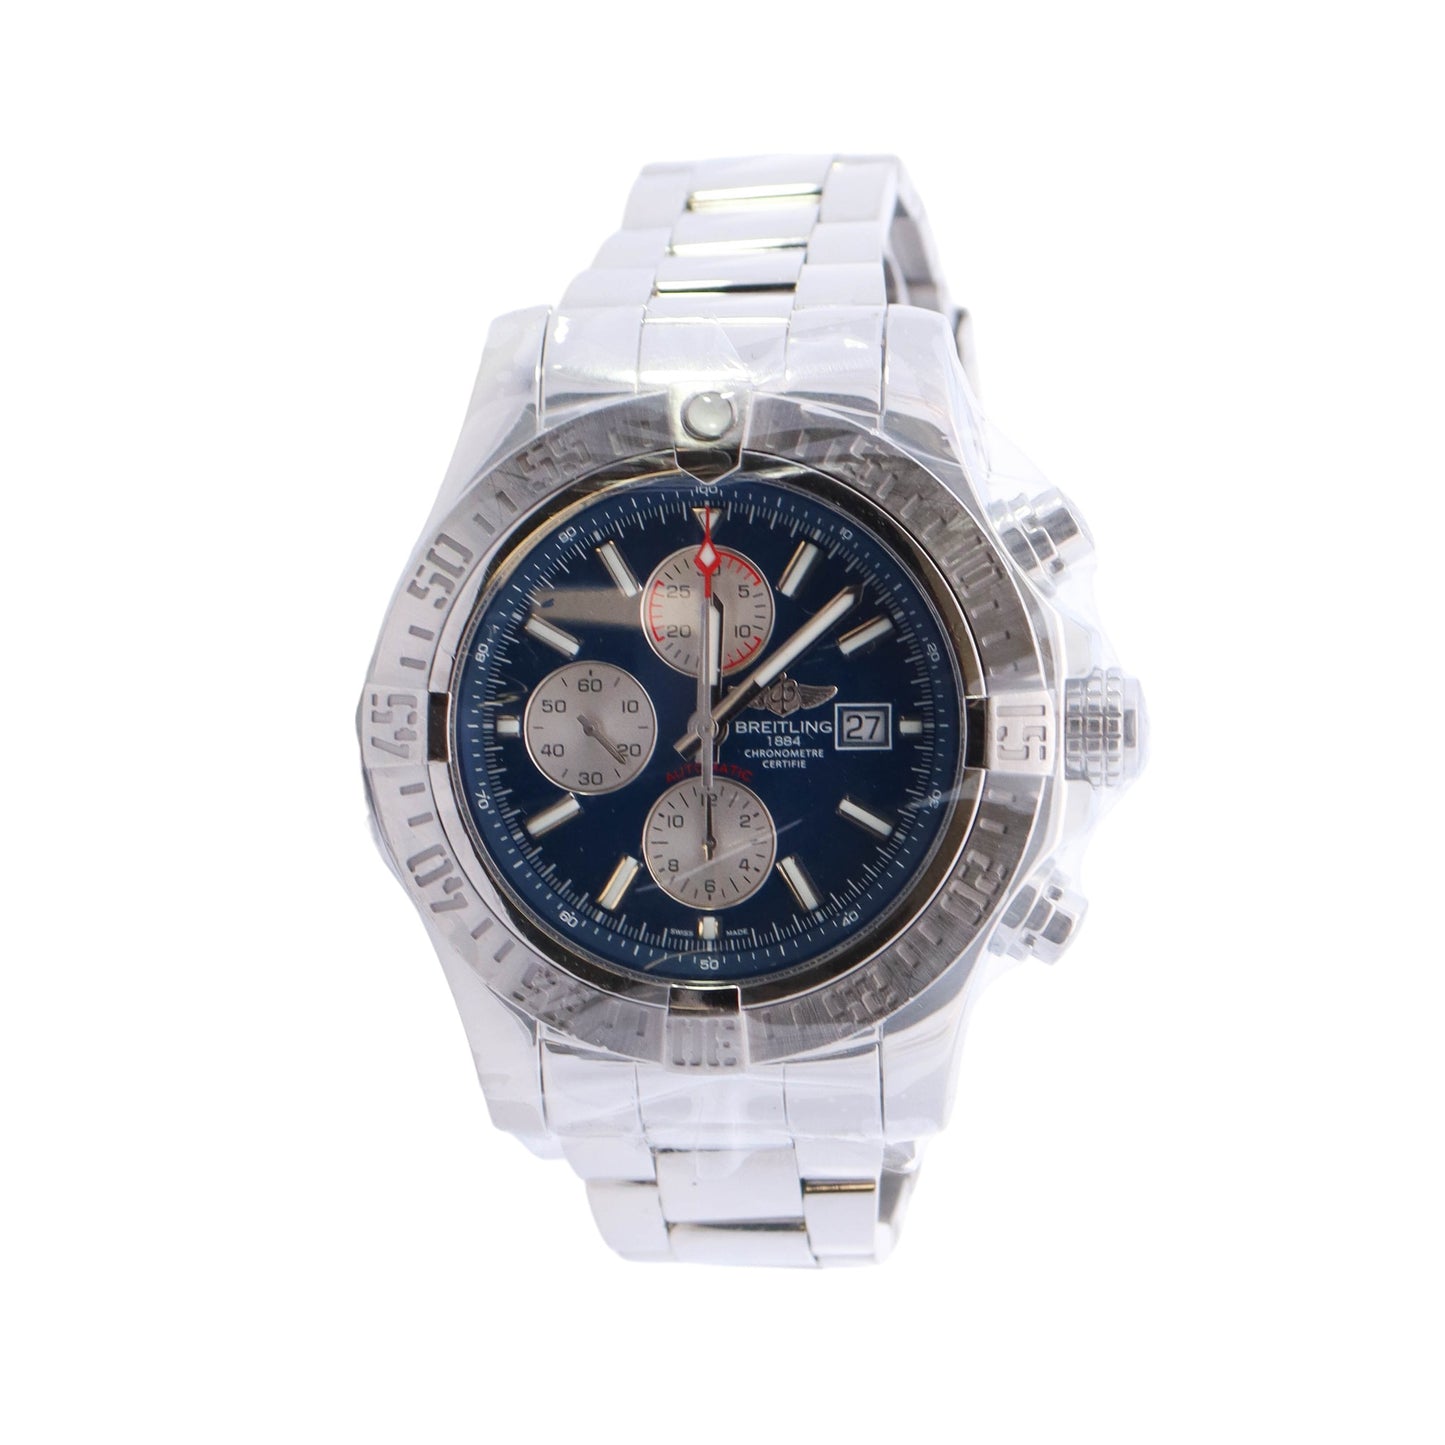 Breitling Super Avenger II Stainless Steel Blue Chronograph Dial Watch Reference #: A13371 - Happy Jewelers Fine Jewelry Lifetime Warranty